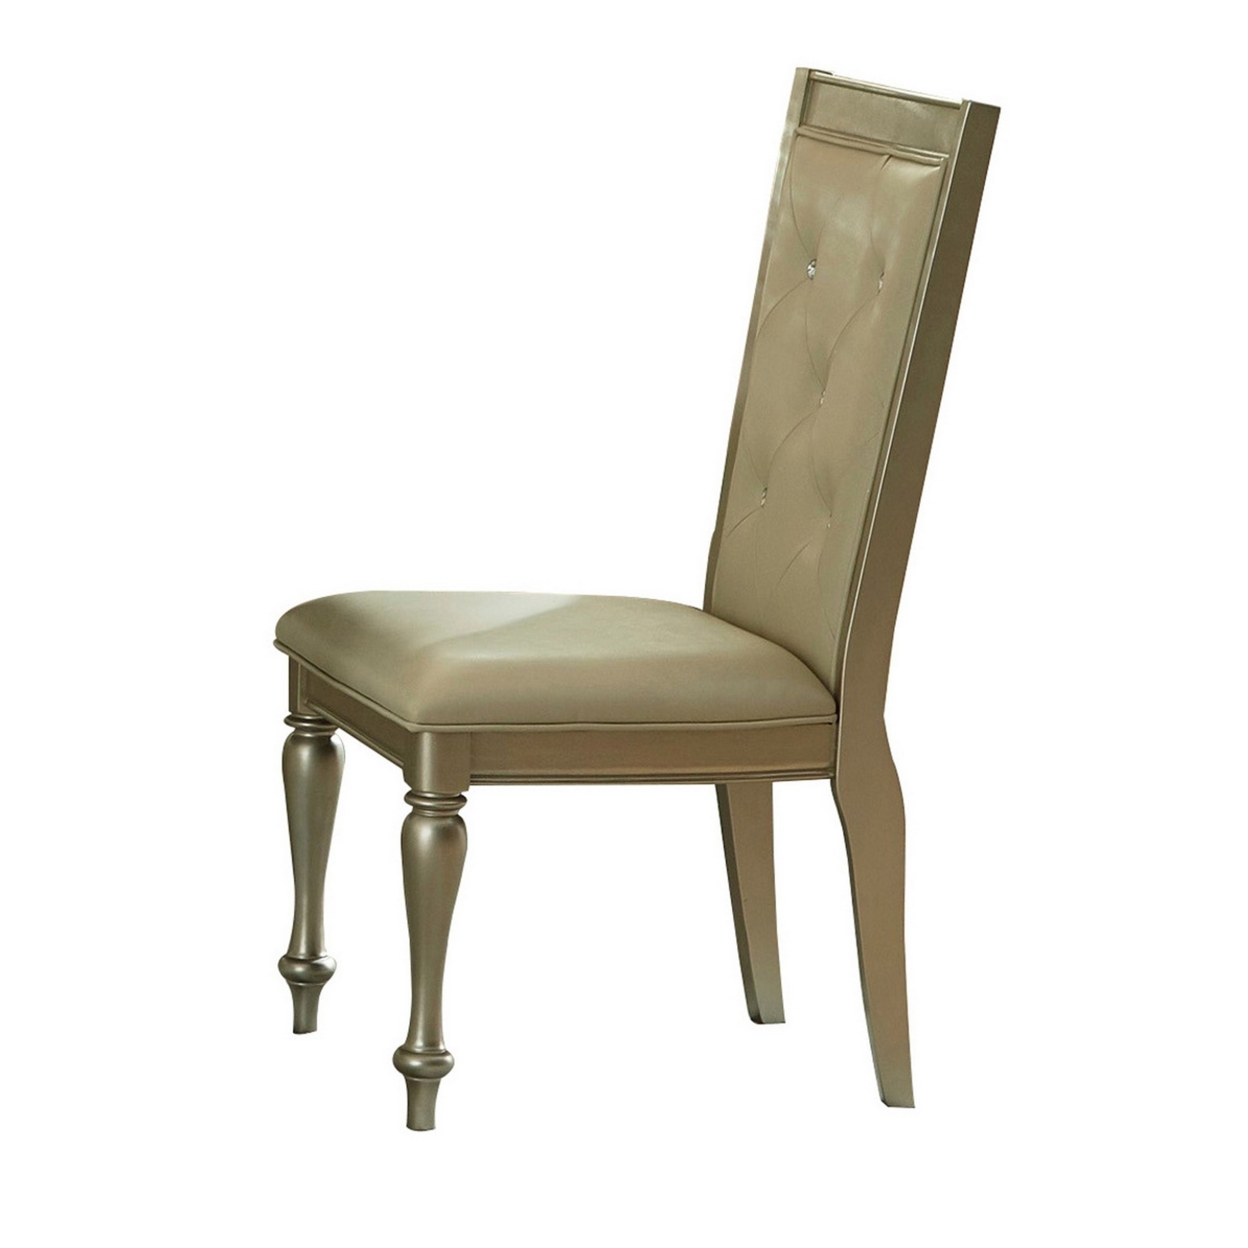 Wooden Side Chair With Crystal Tufted Leatherette Backrest, Gold- Saltoro Sherpi